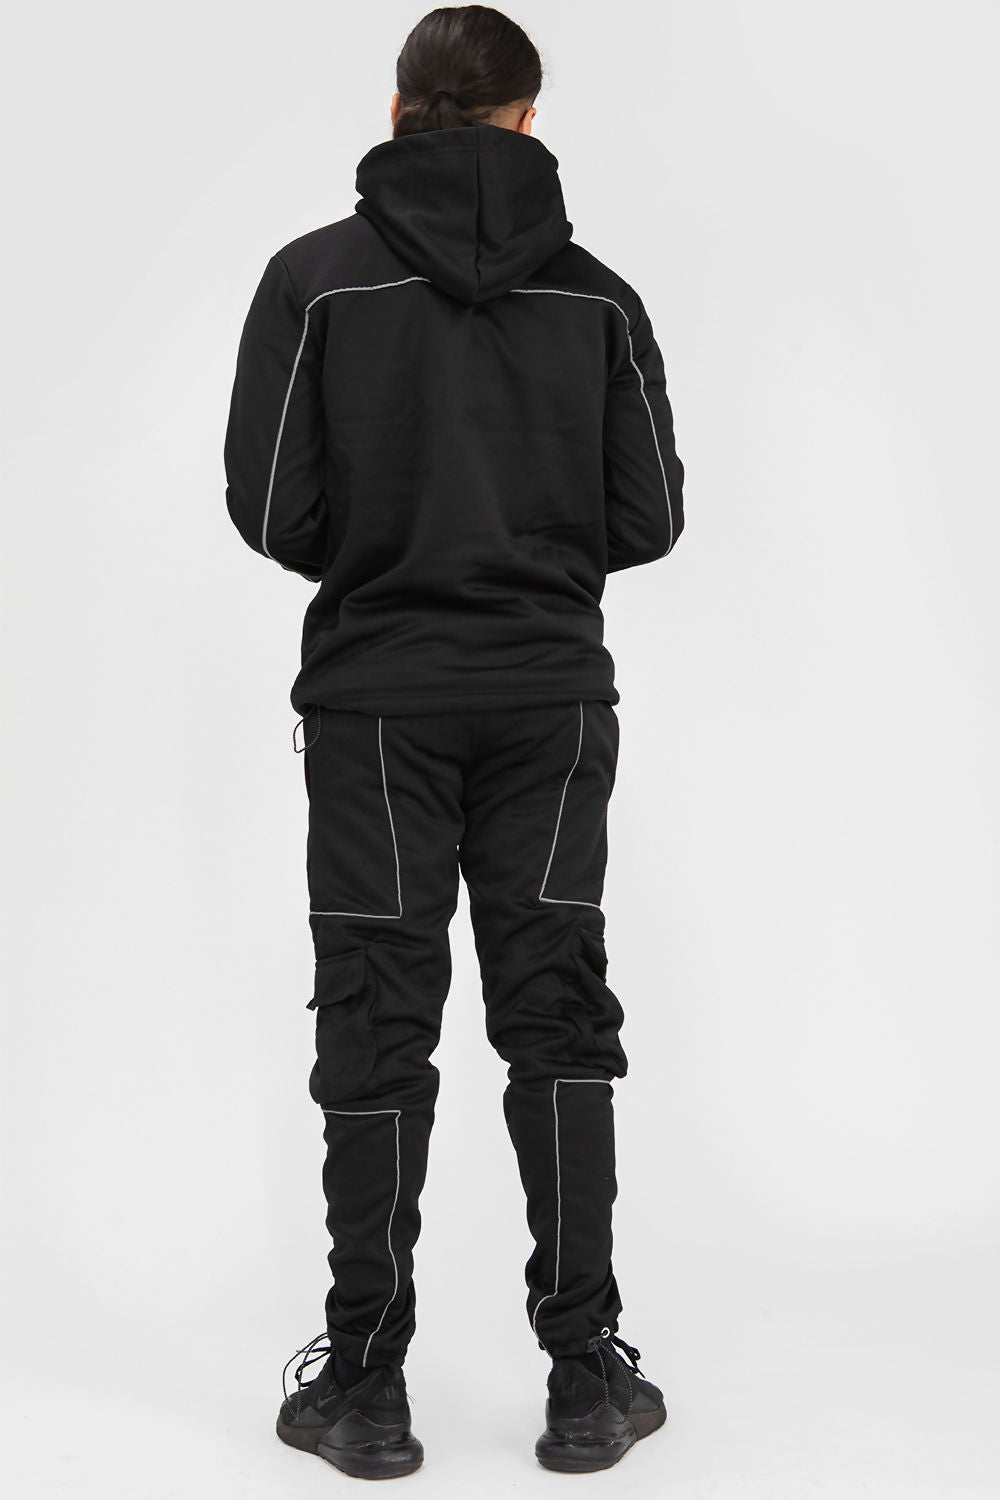 MENS REFLECTIVE PIPED PULLOVER CARGO TRACKSUIT BLACK